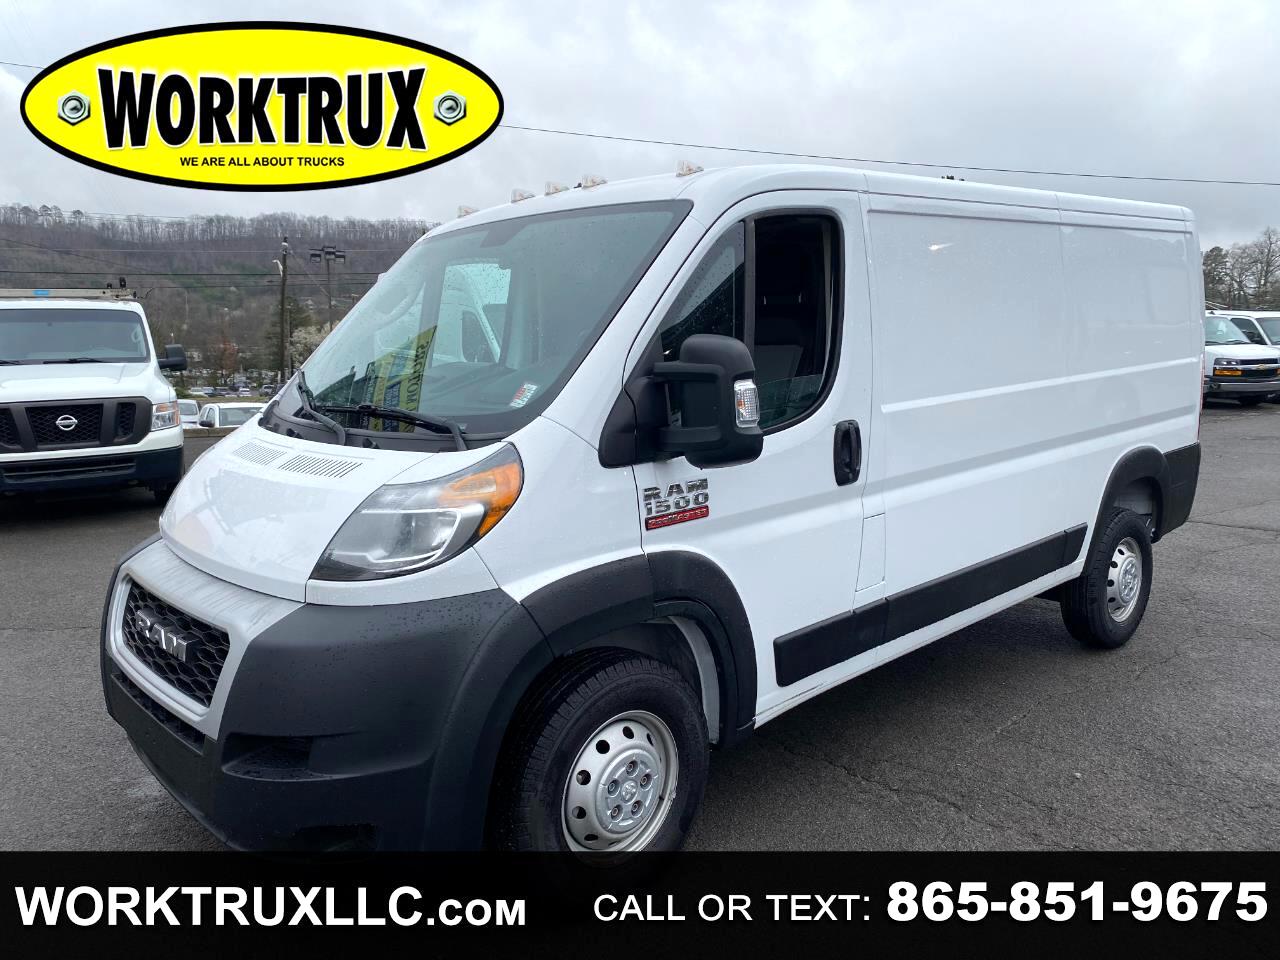 Used 2020 RAM ProMaster Cargo Van 1500 Low Roof 136" WB for Sale in  Knoxville TN 37912 WorkTrux